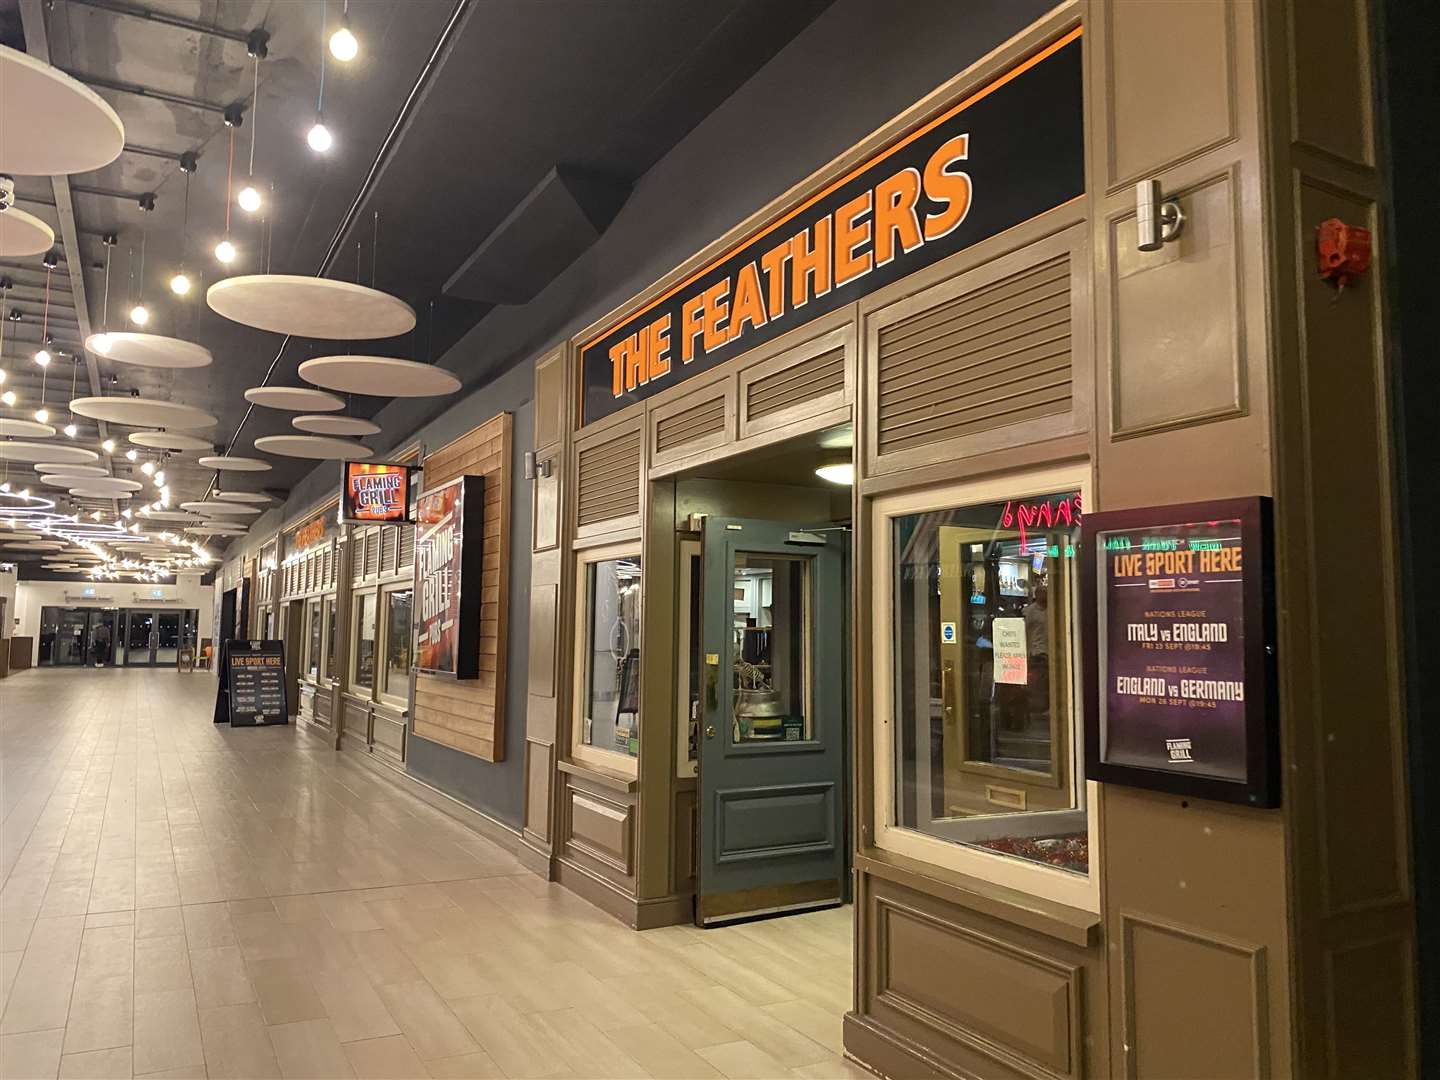 The Burger King and Frankie & Benny's sites are directly next to Feathers in the cinema complex